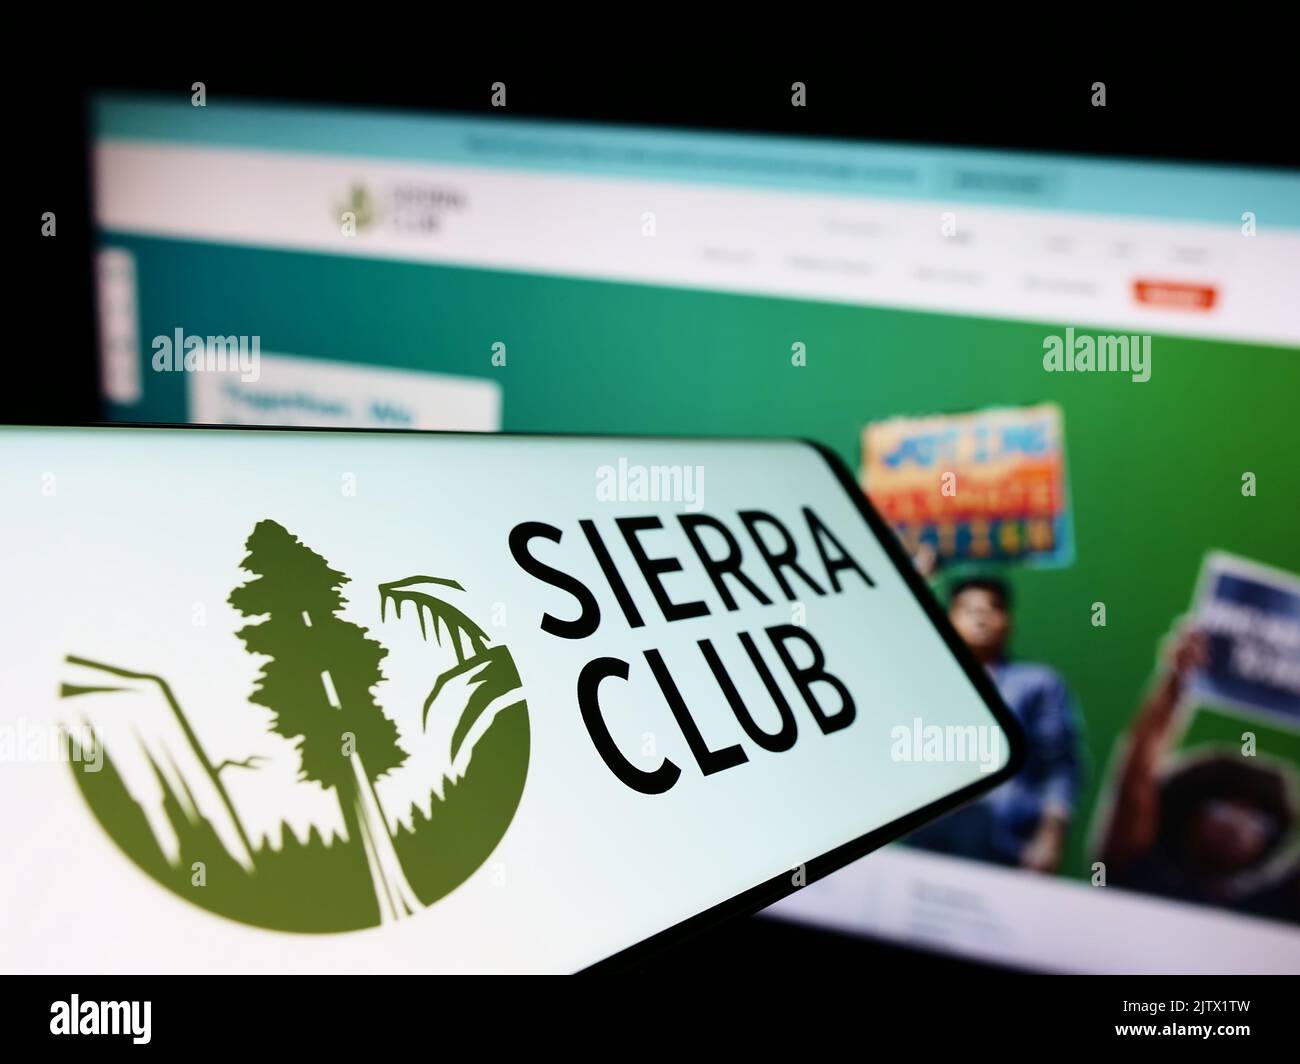 Cellphone with logo of American environmental organization Sierra Club on screen in front of website. Focus on center of phone display. Stock Photo